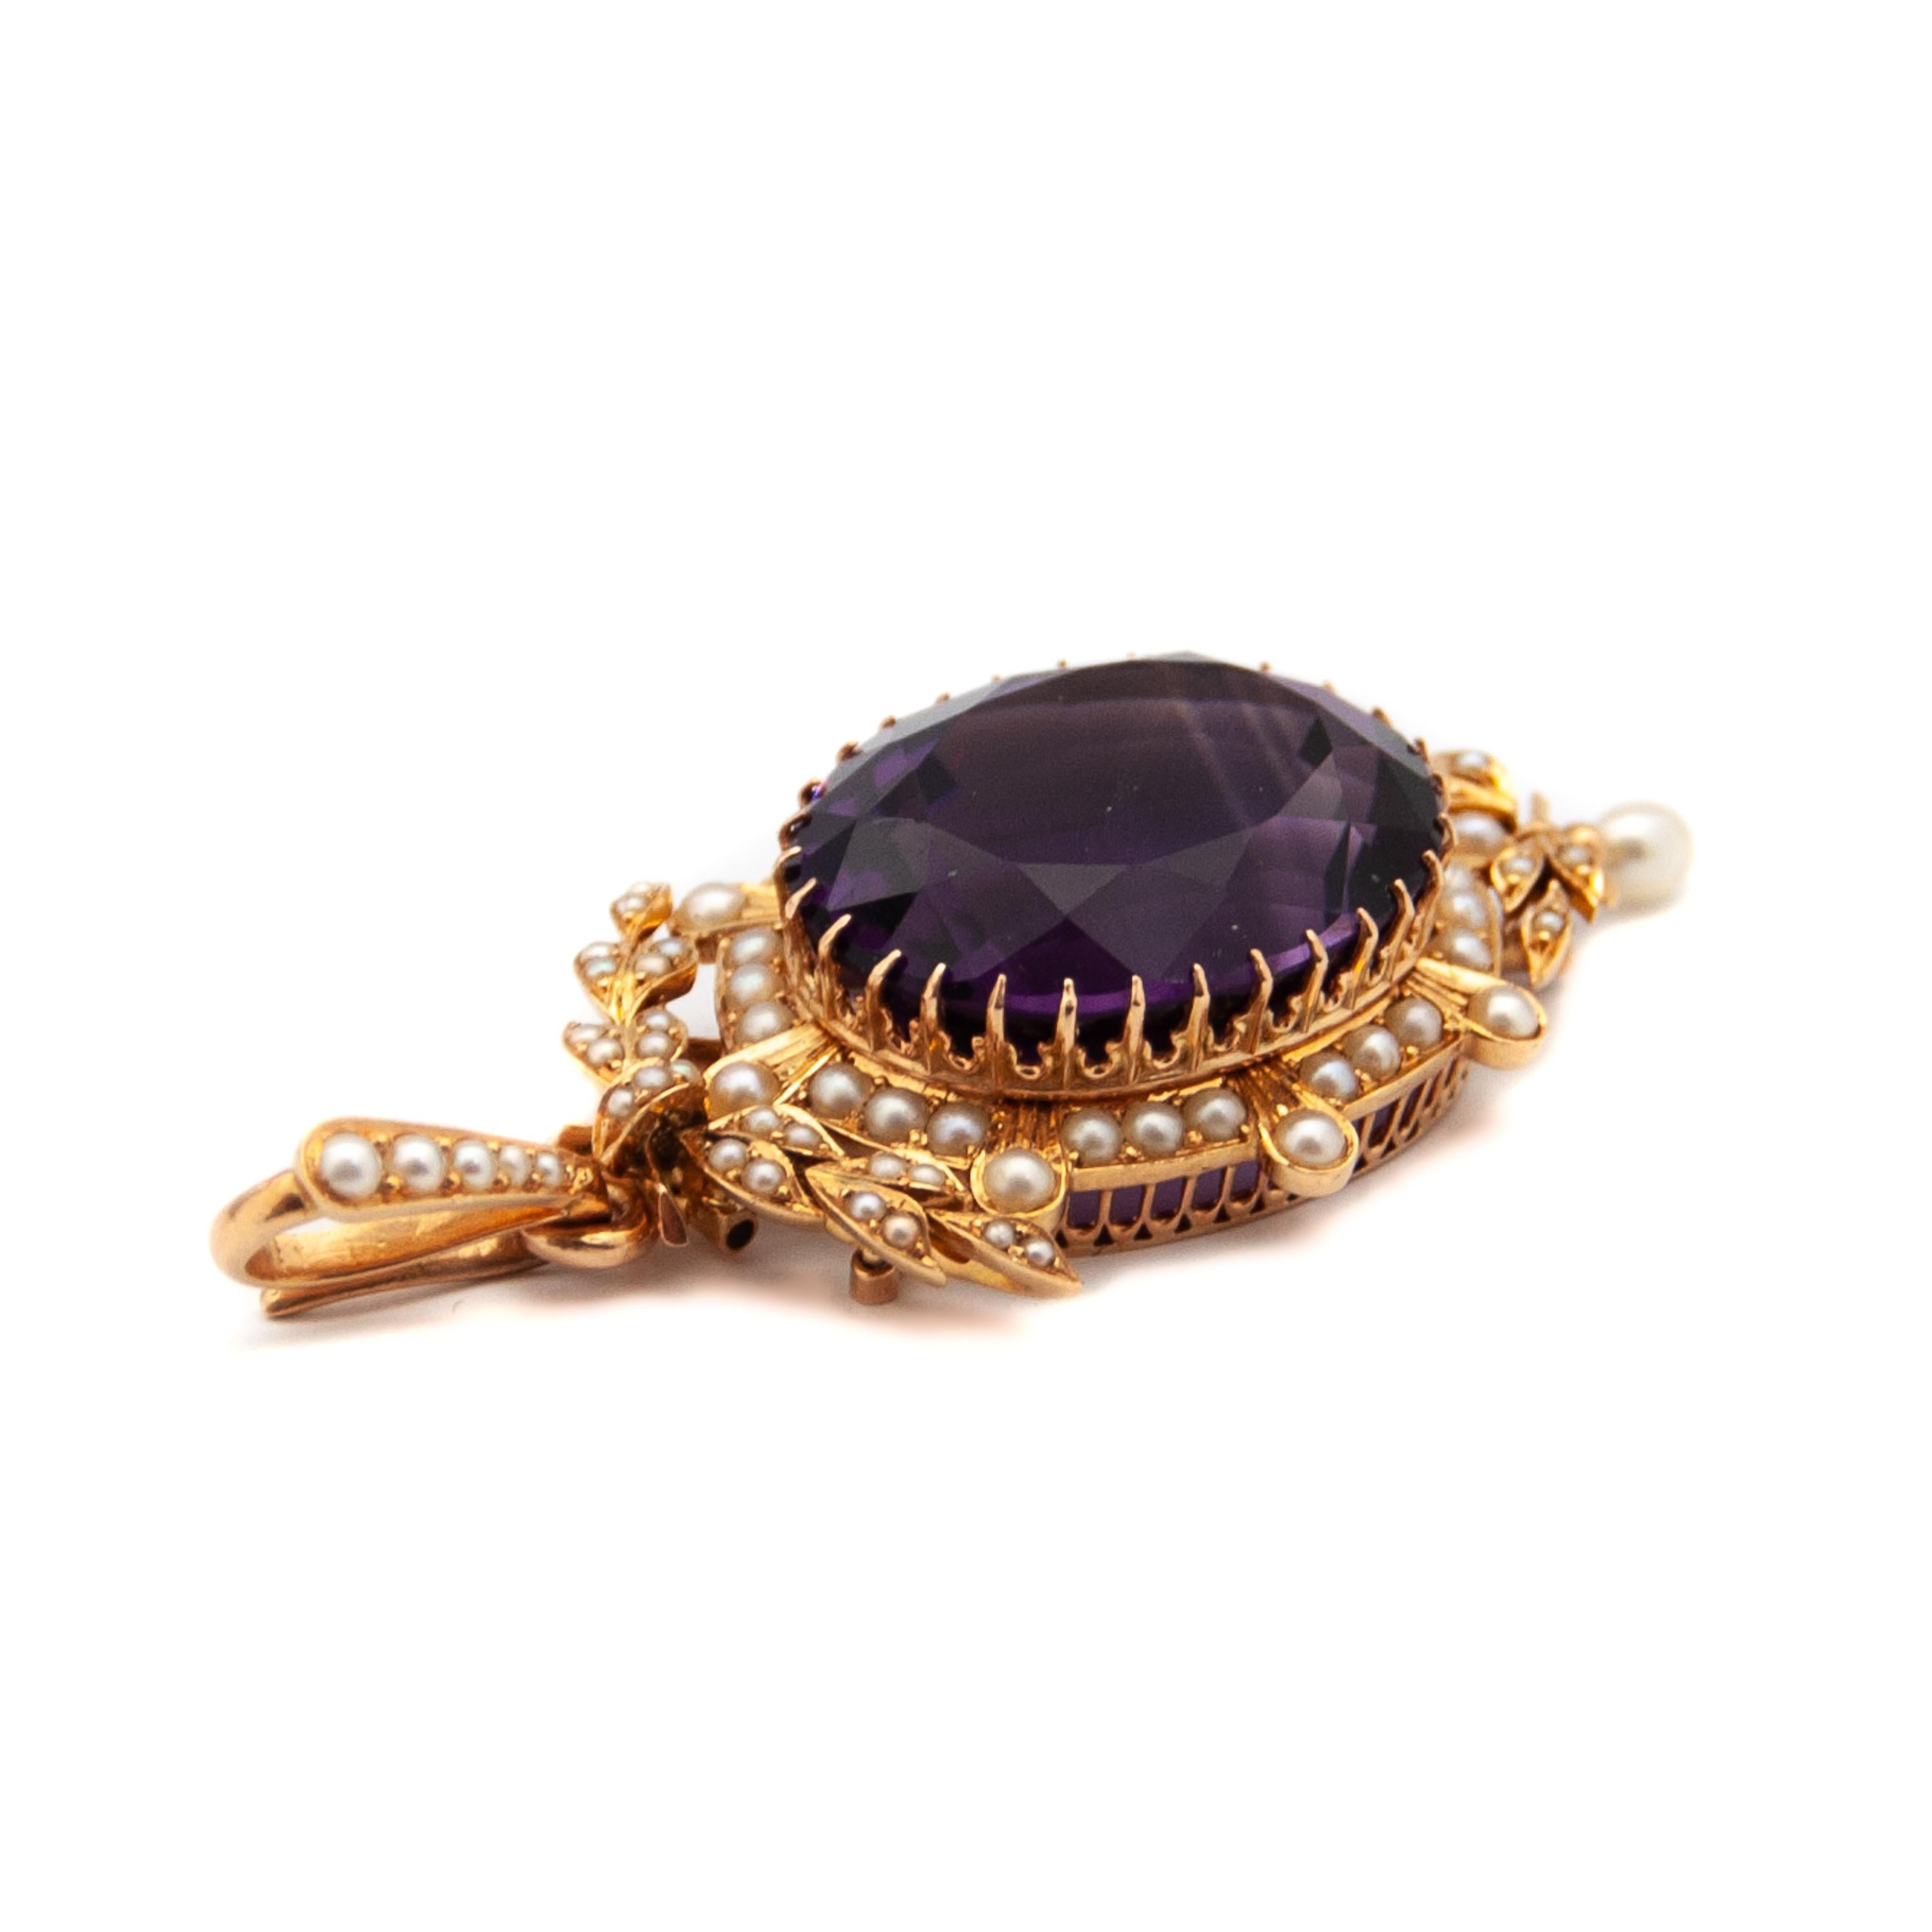 Amethyst and Pearls 14K Gold Pendant 5